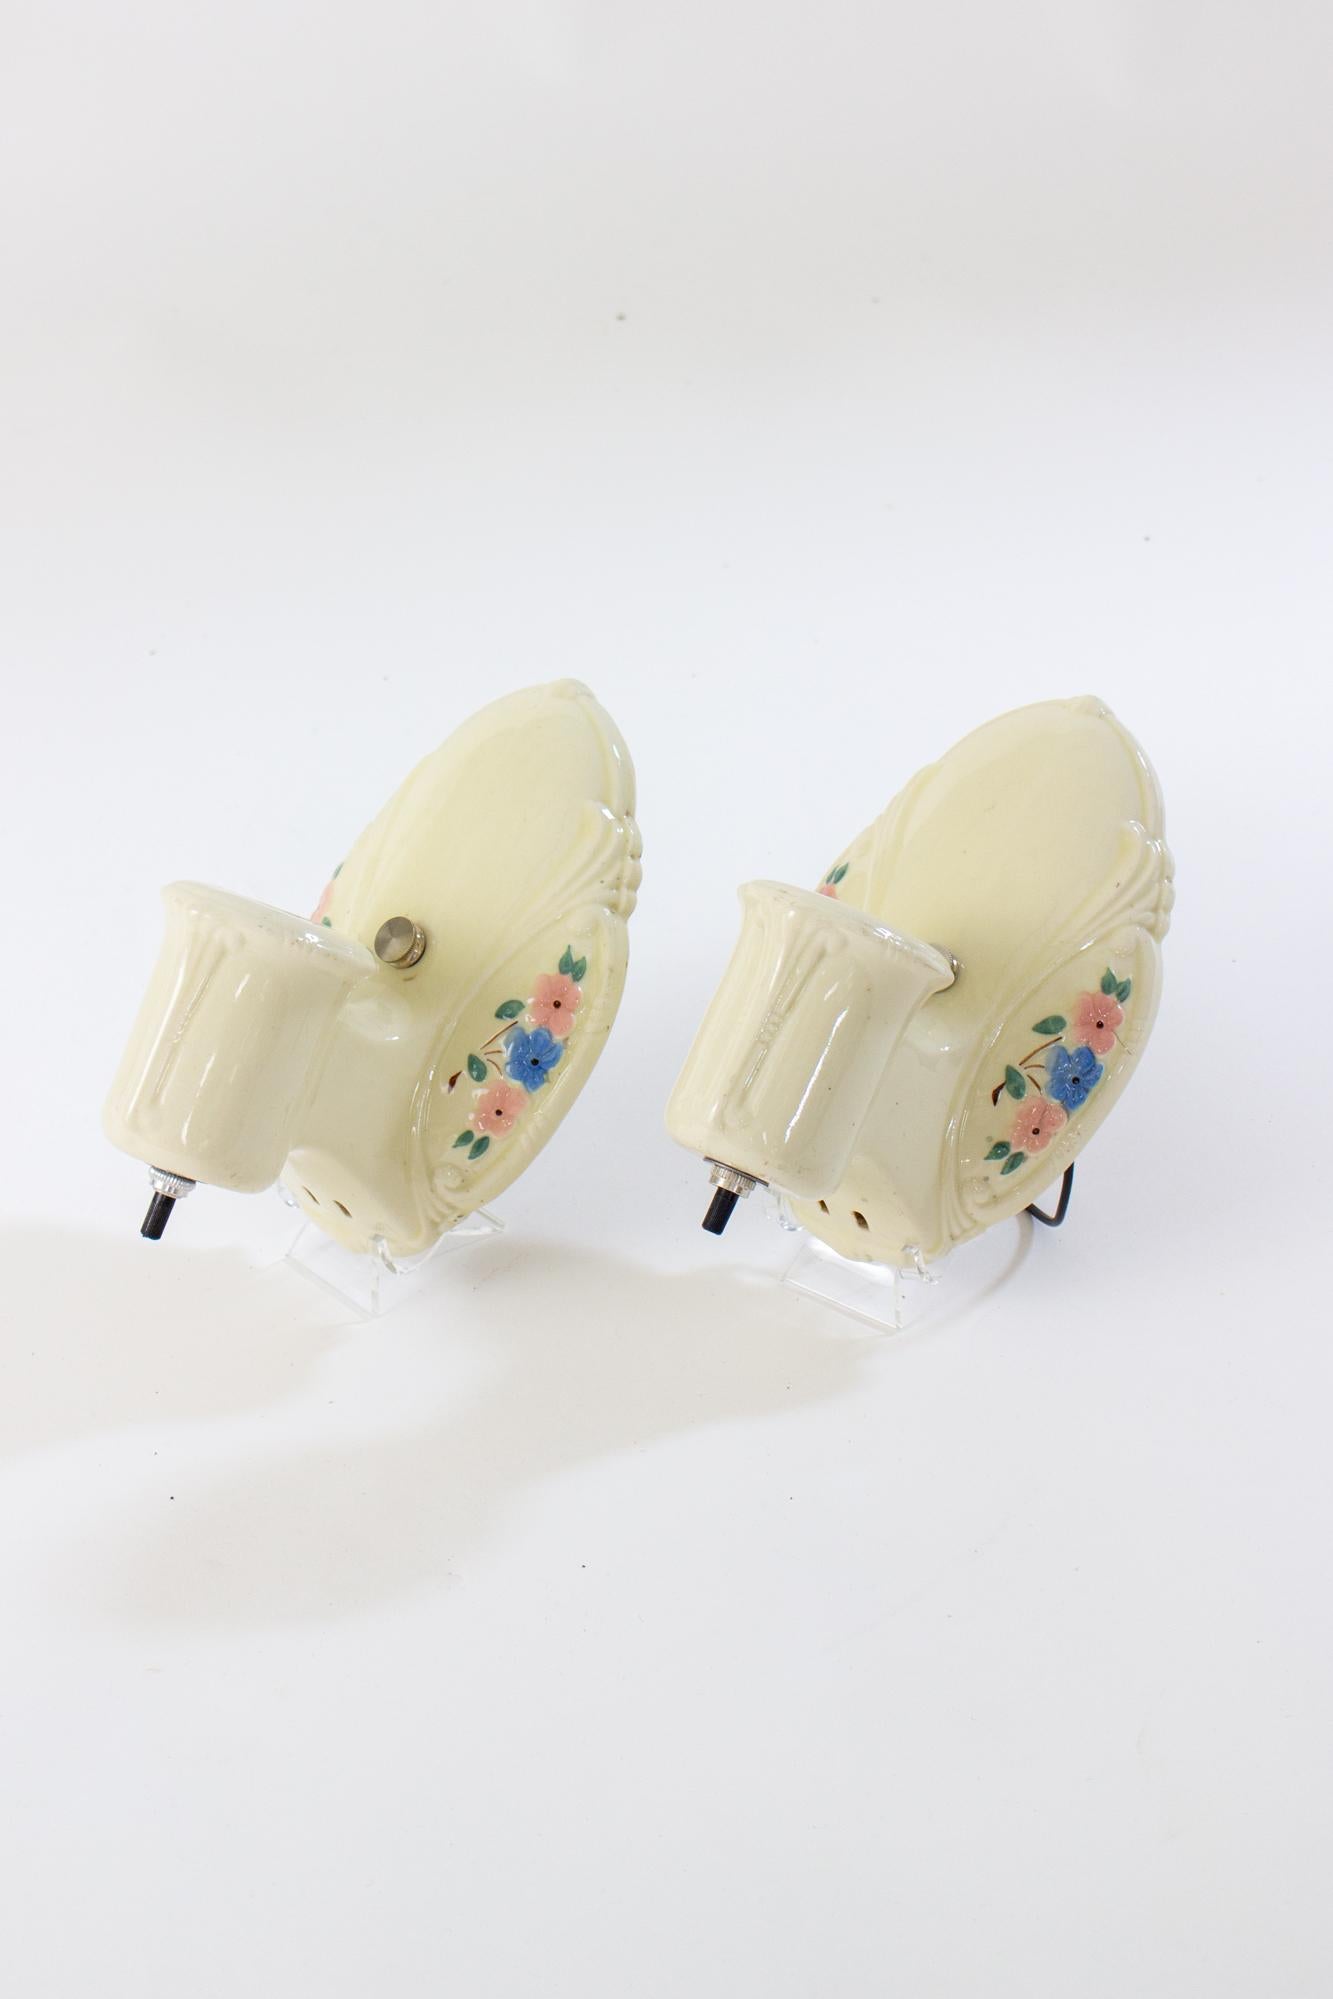 American 1950’s Porcelain Harmony House Flowered Sconces - a Pair For Sale